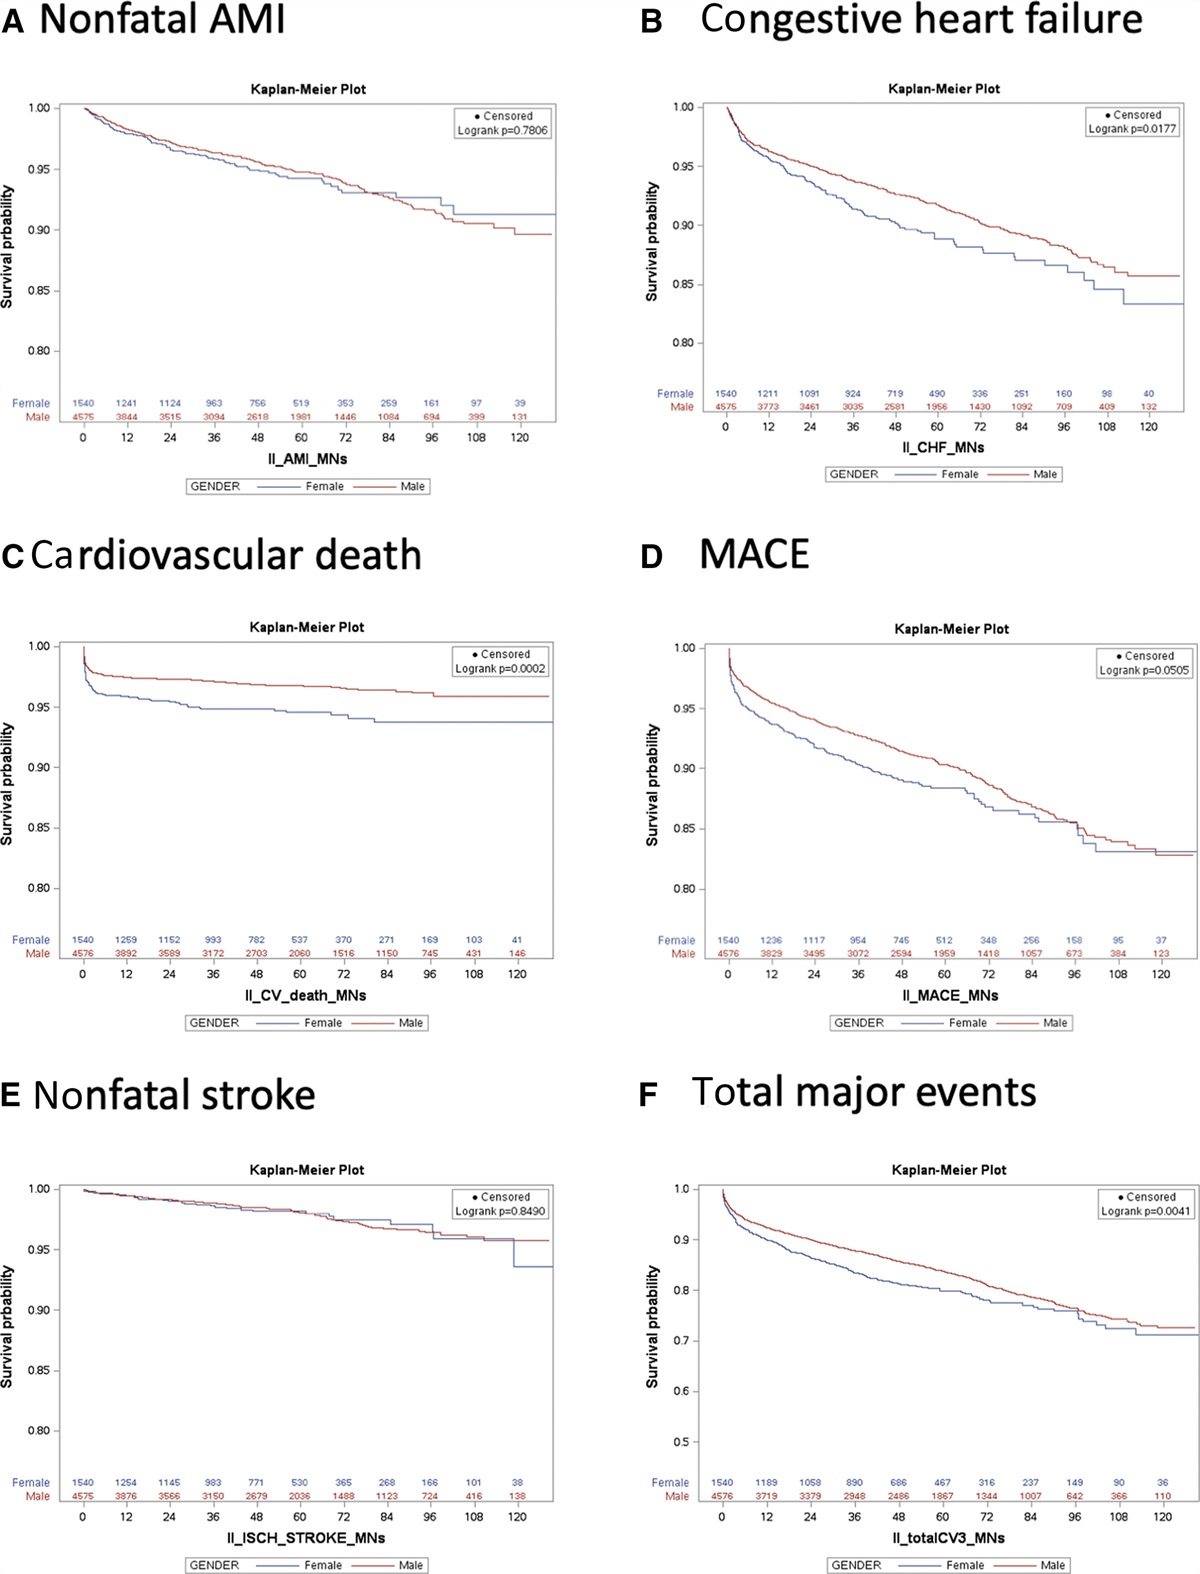 Sex and age differences of major cardiovascular events in patients after percutaneous coronary intervention